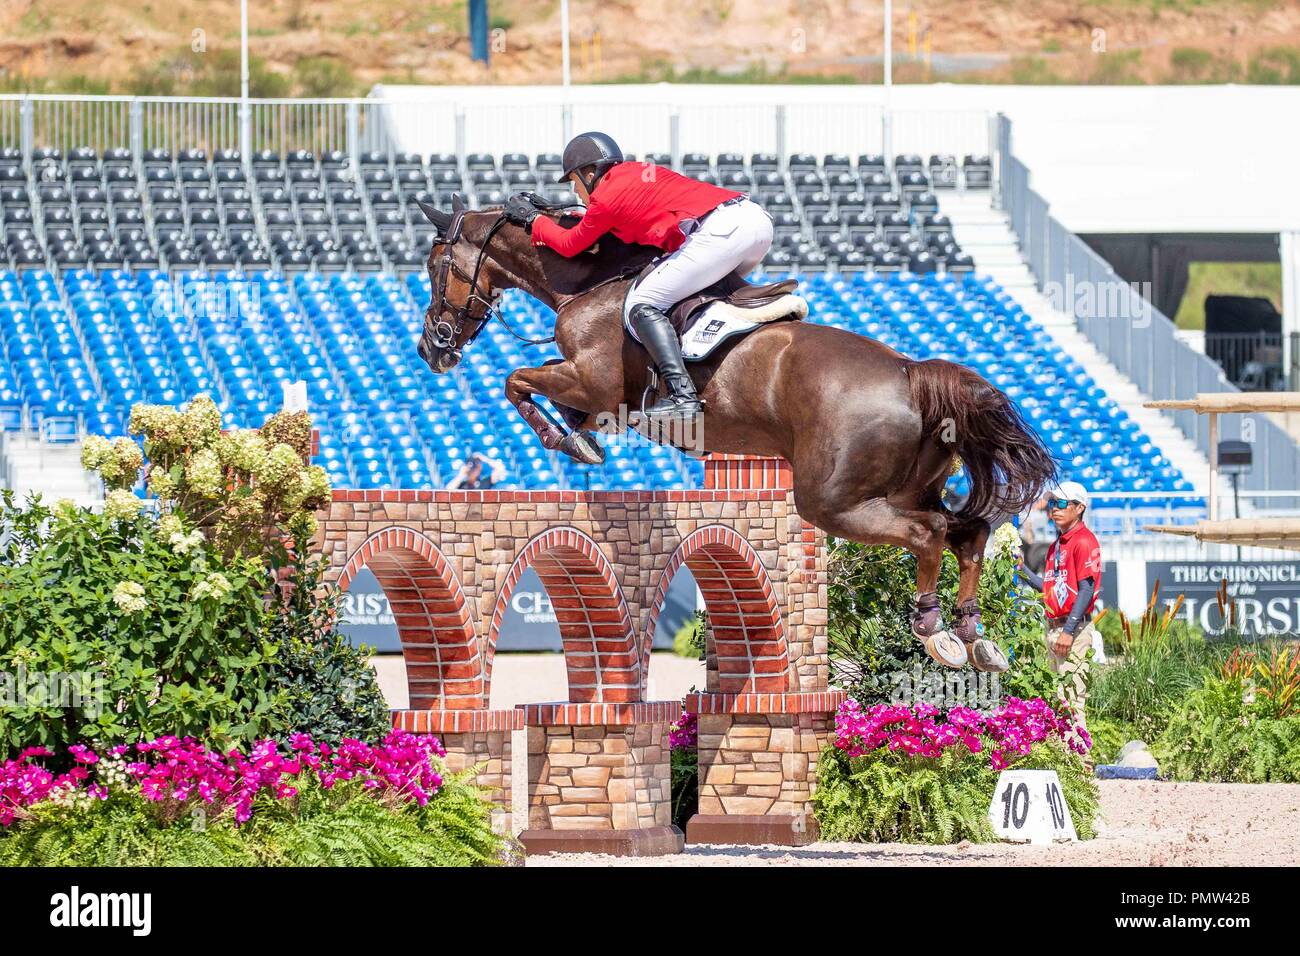 Tryon, California, USA. 19th Sept 2018. Gabor Szabo Jr. Timpex Bolcsesz. HUN. Jumping. Individual and Team Championship. Day 8. World Equestrian Games. WEG 2018 Tryon. North Carolina. USA. 19/09/2018. Credit: Sport In Pictures/Alamy Live News Stock Photo